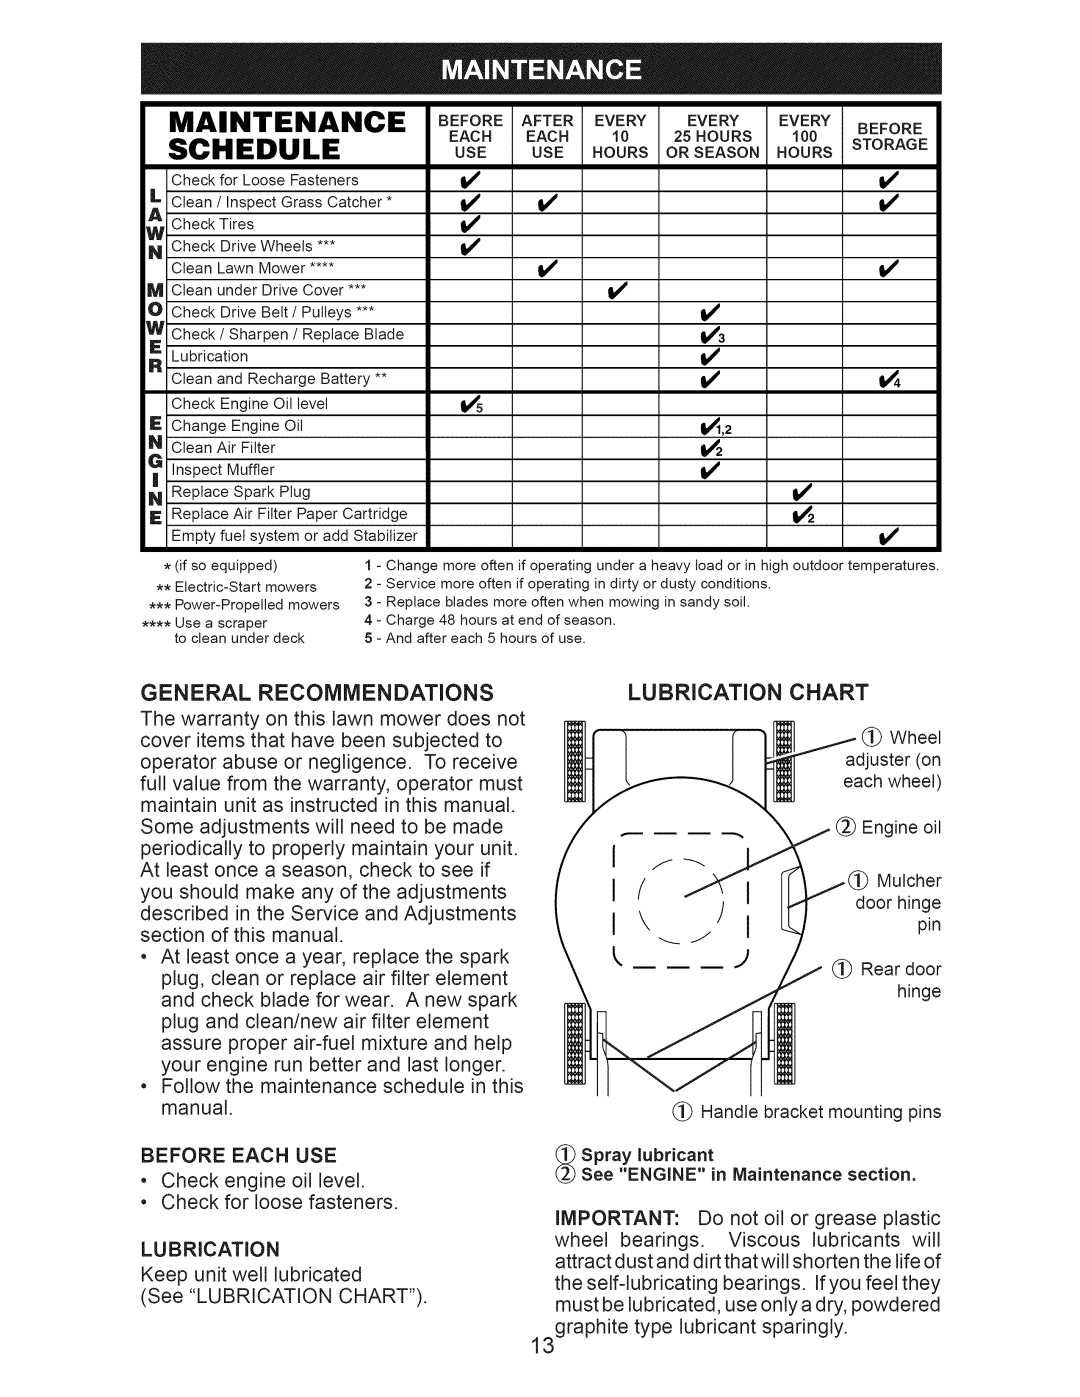 Craftsman 917.374061 owner manual Maintenance, Schedule, Use Hours 